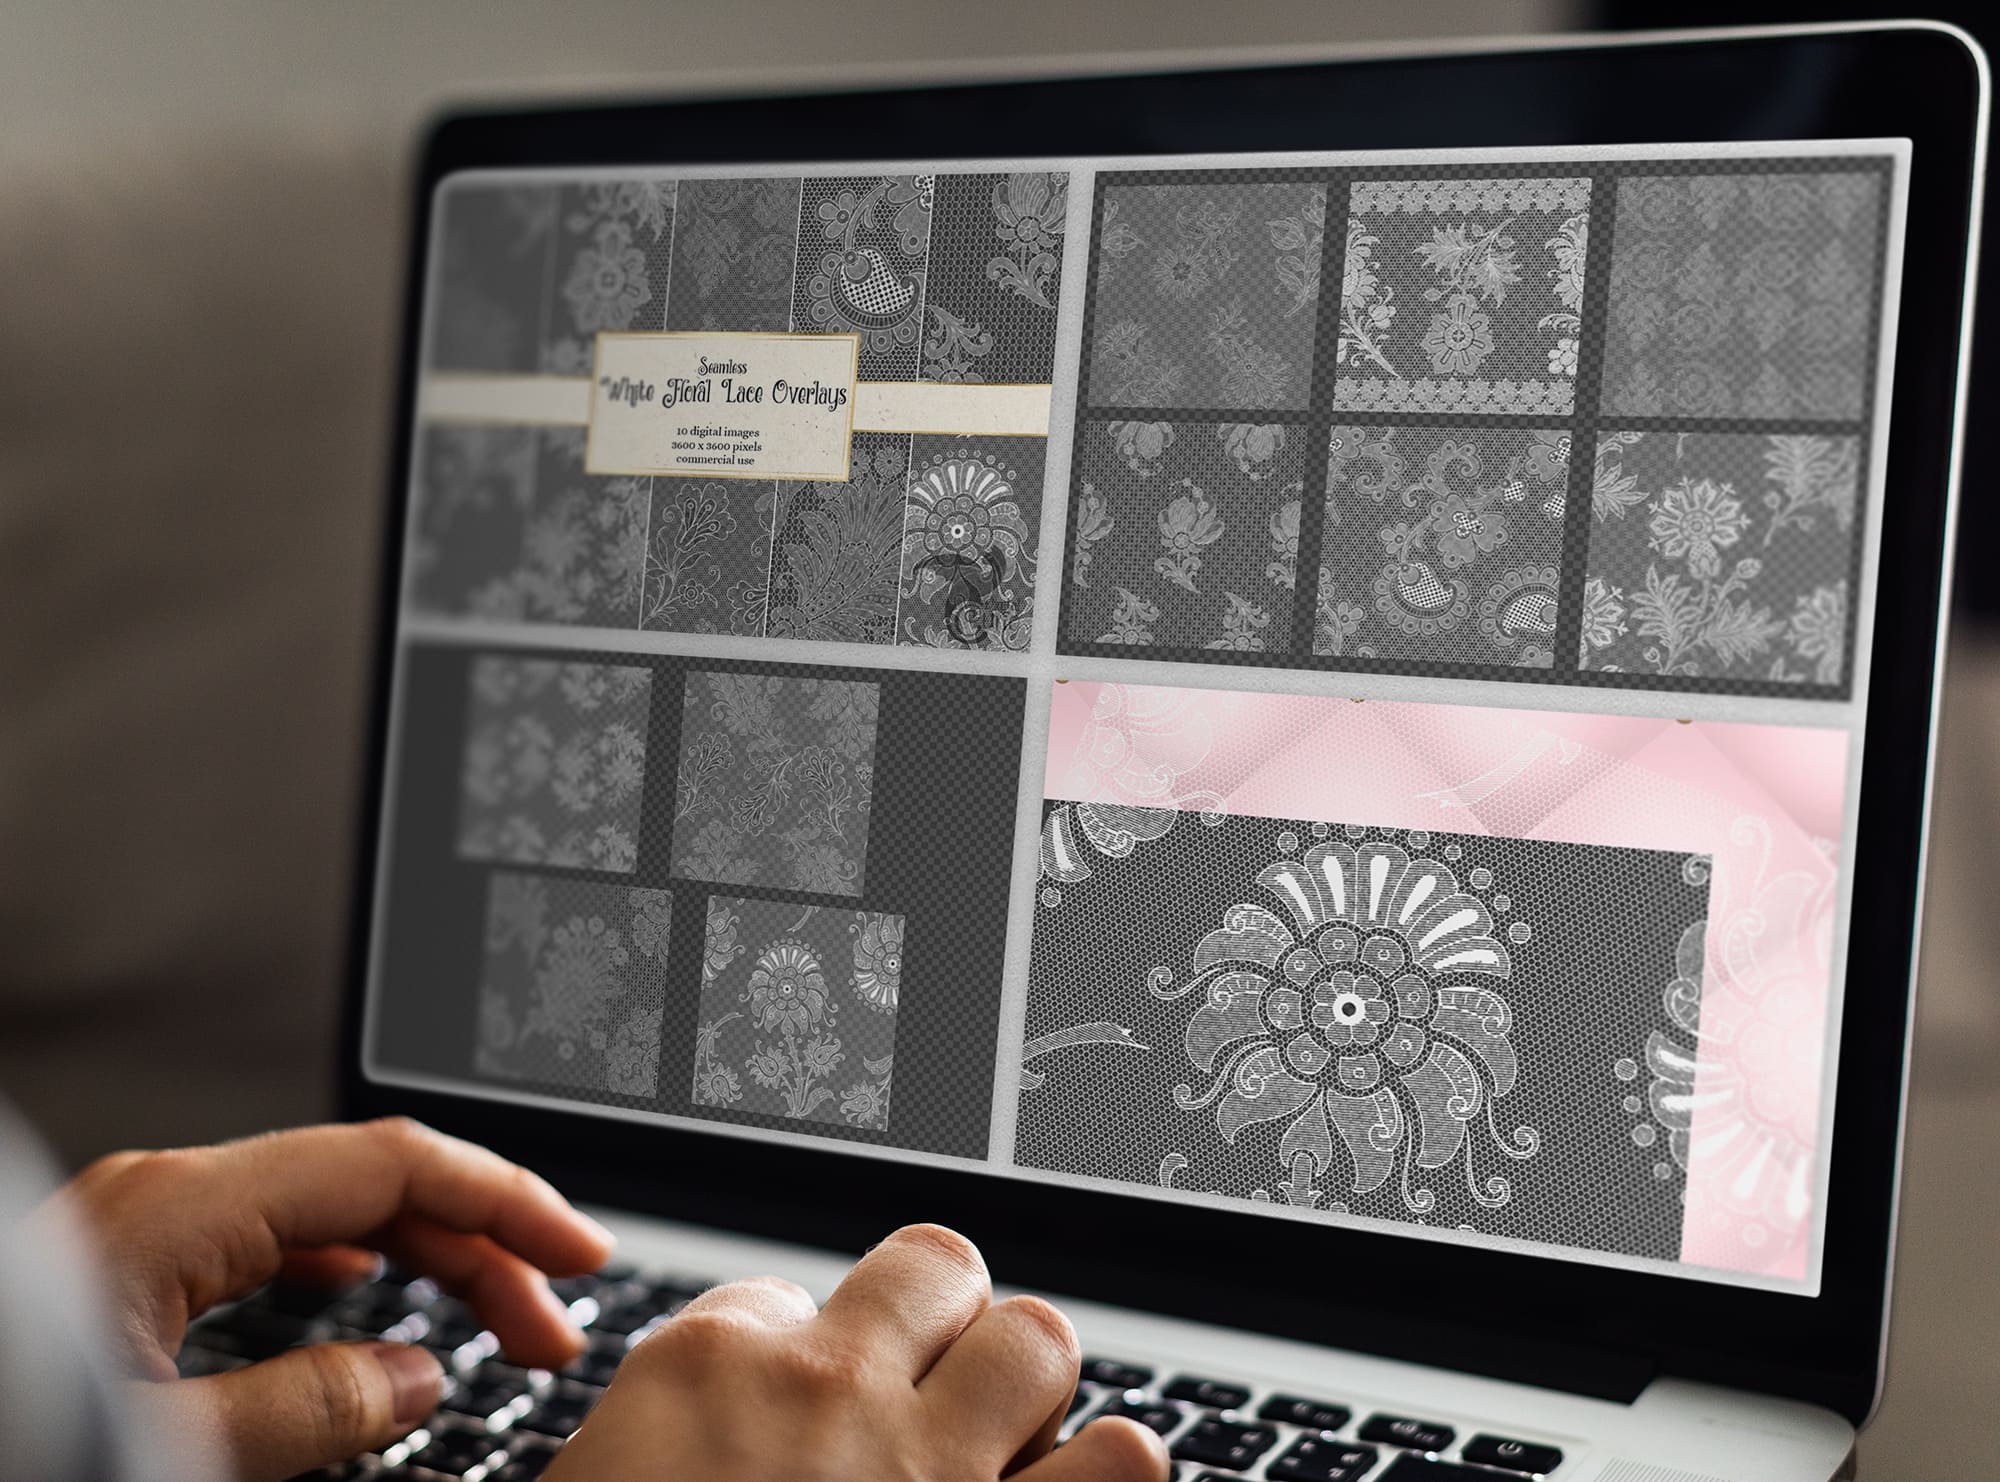 White Floral Lace Overlays on the MacBook Mockup.